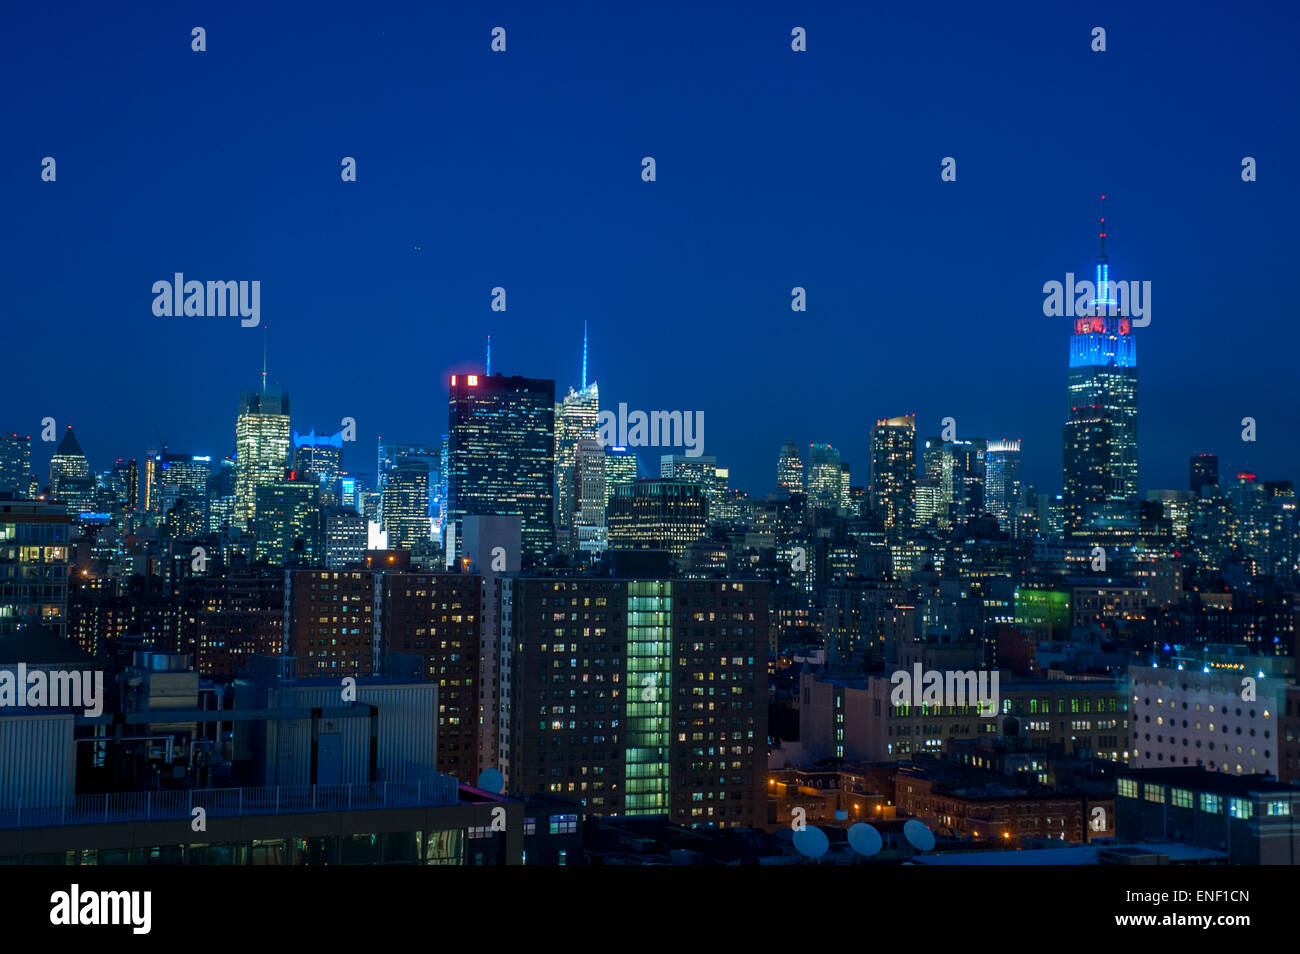 New York City, NY, USA, Nighttime Overviews, City Scapes / Skylines US Cities from Top, Manhattan Skyline, Stock Photo